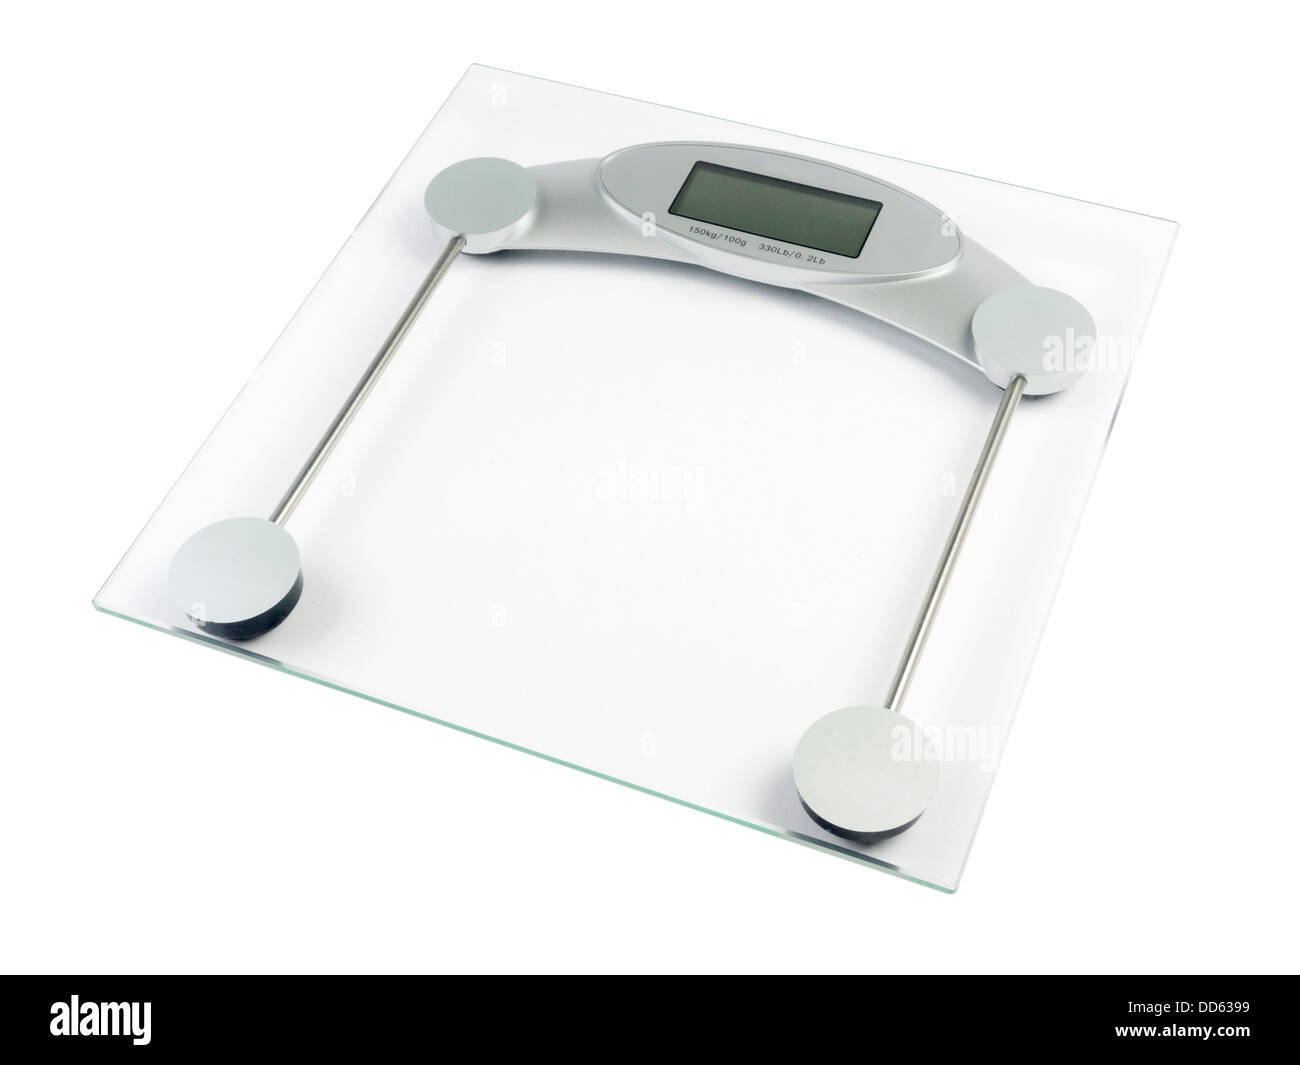 Digital bathroom weighing scales cut out isolated on white background Stock Photo